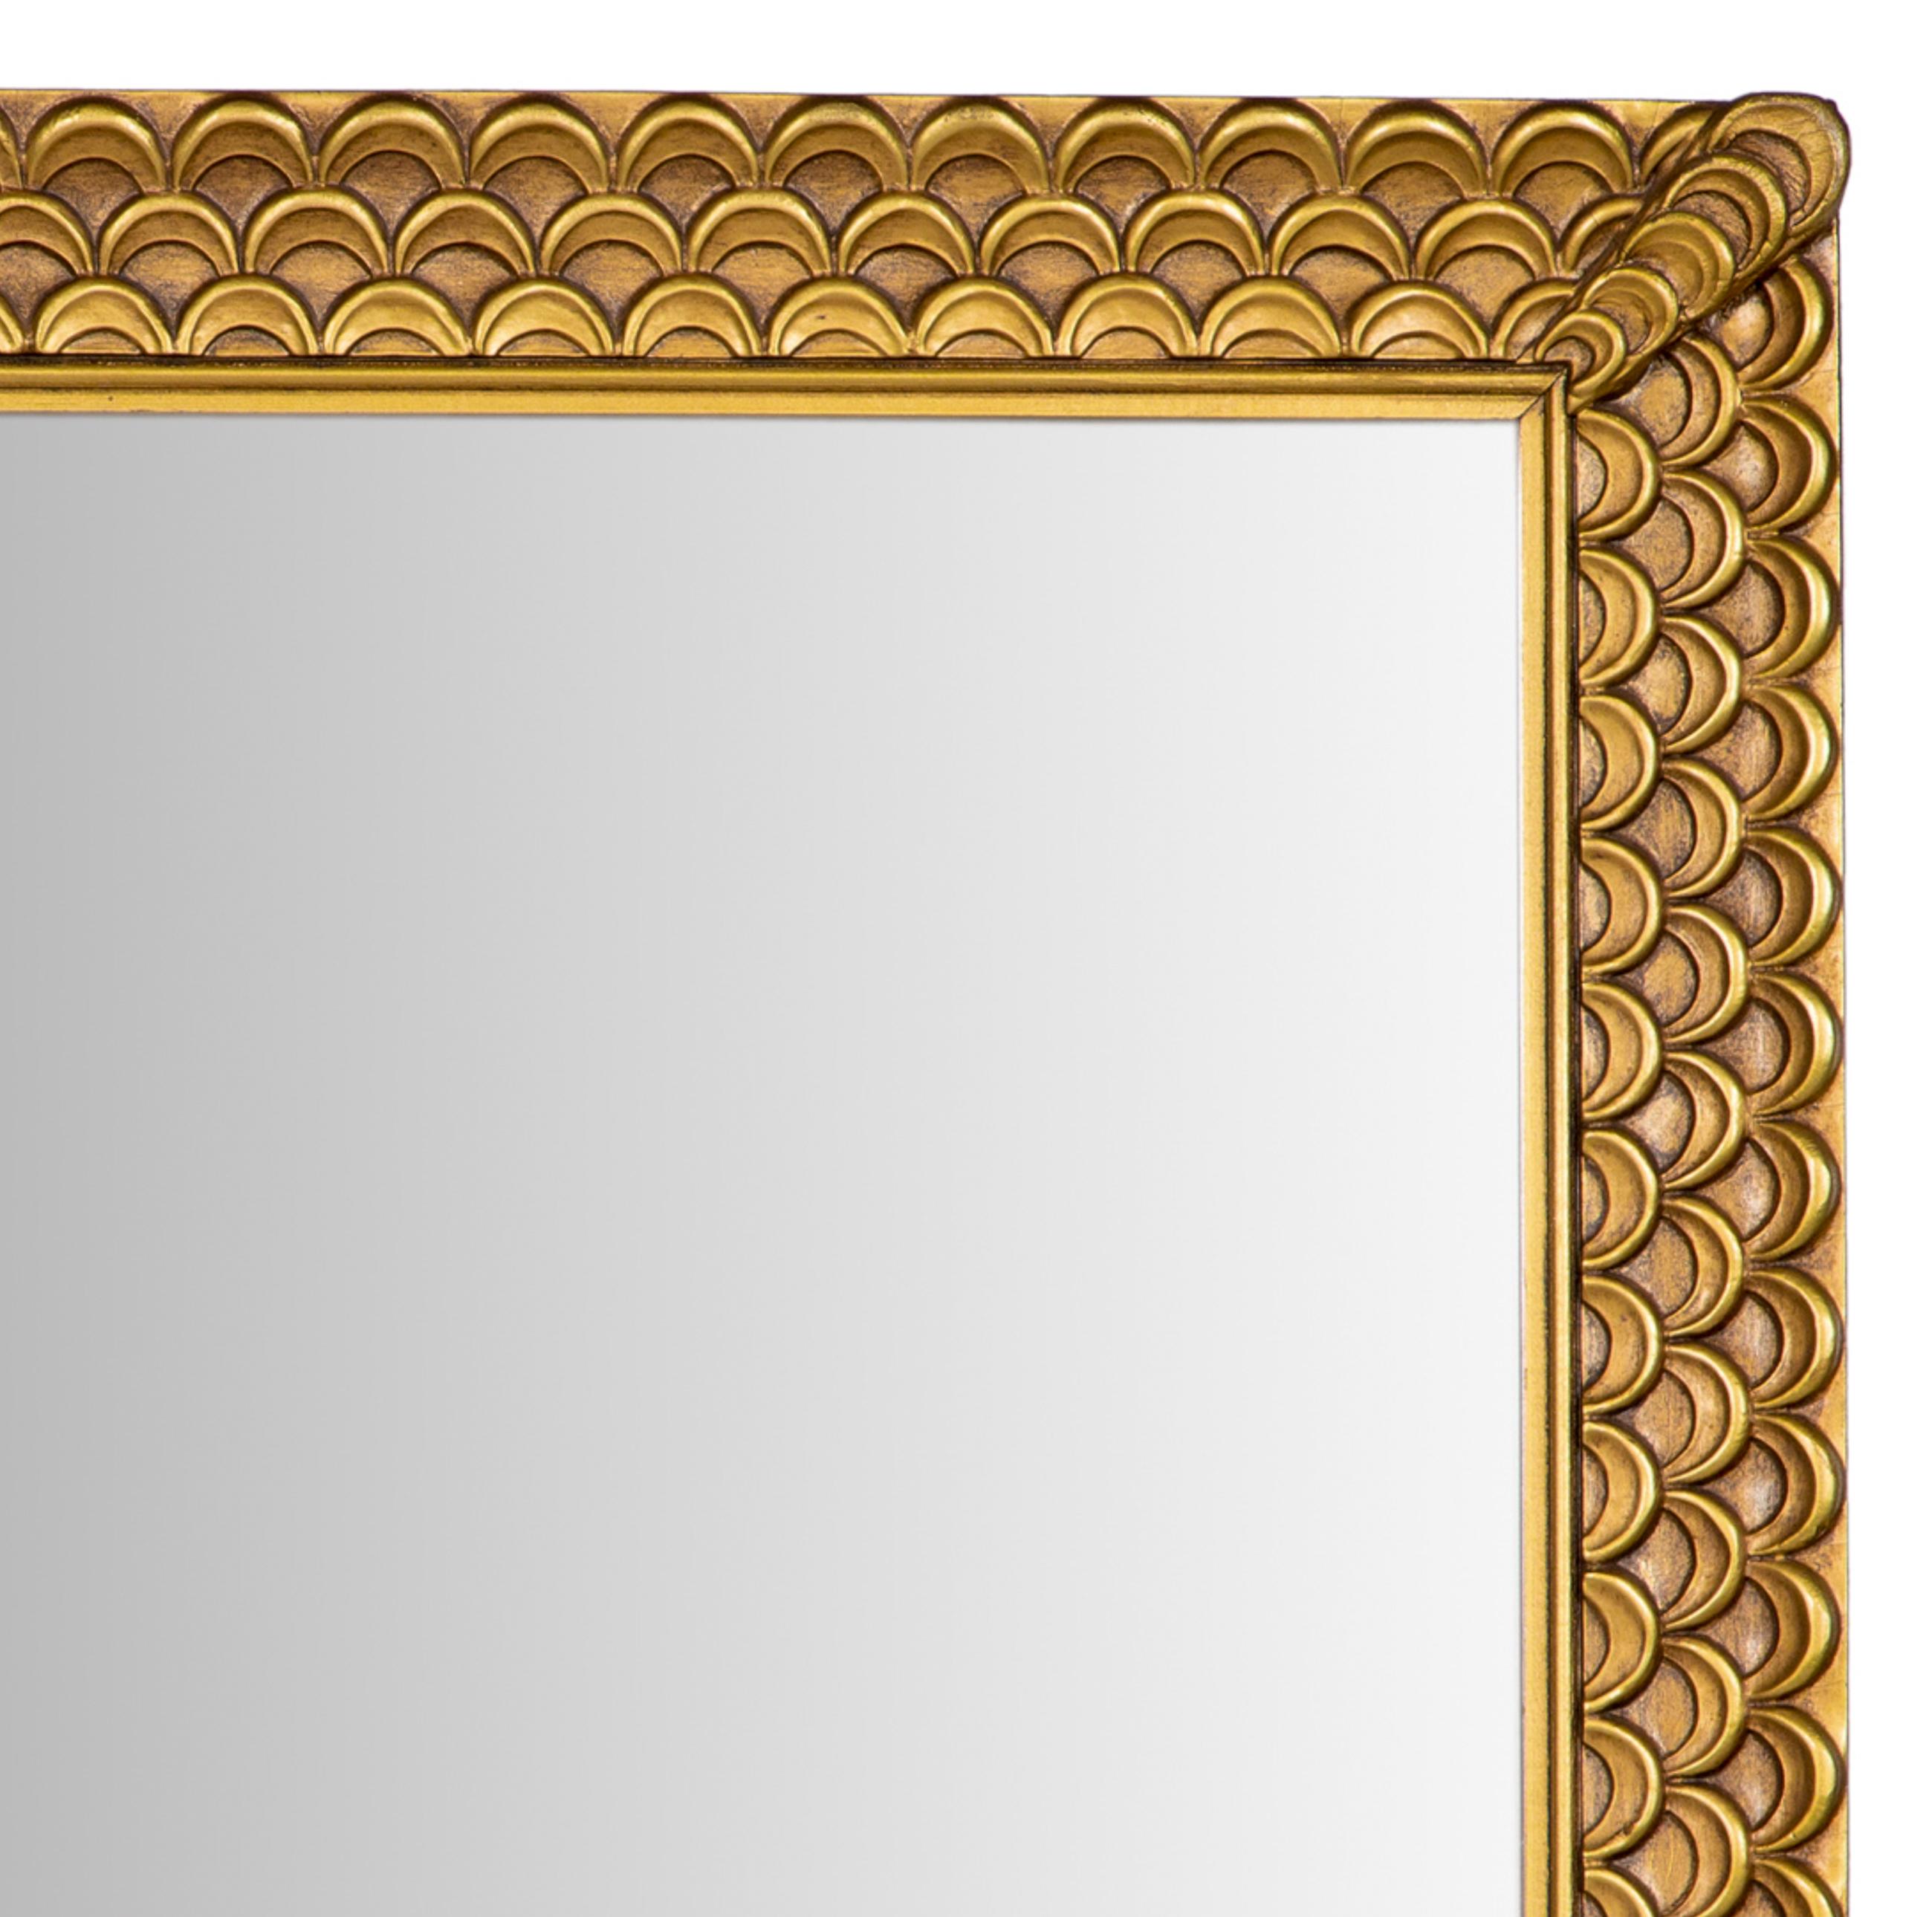 A unique overmantle gilded mirror with three rows of scallops on frame and ascending scallops covering corner joints, circa 1940s. Sold by Schuster's Milwaukee with original label retained on newly papered back. Schuster's department store chain,